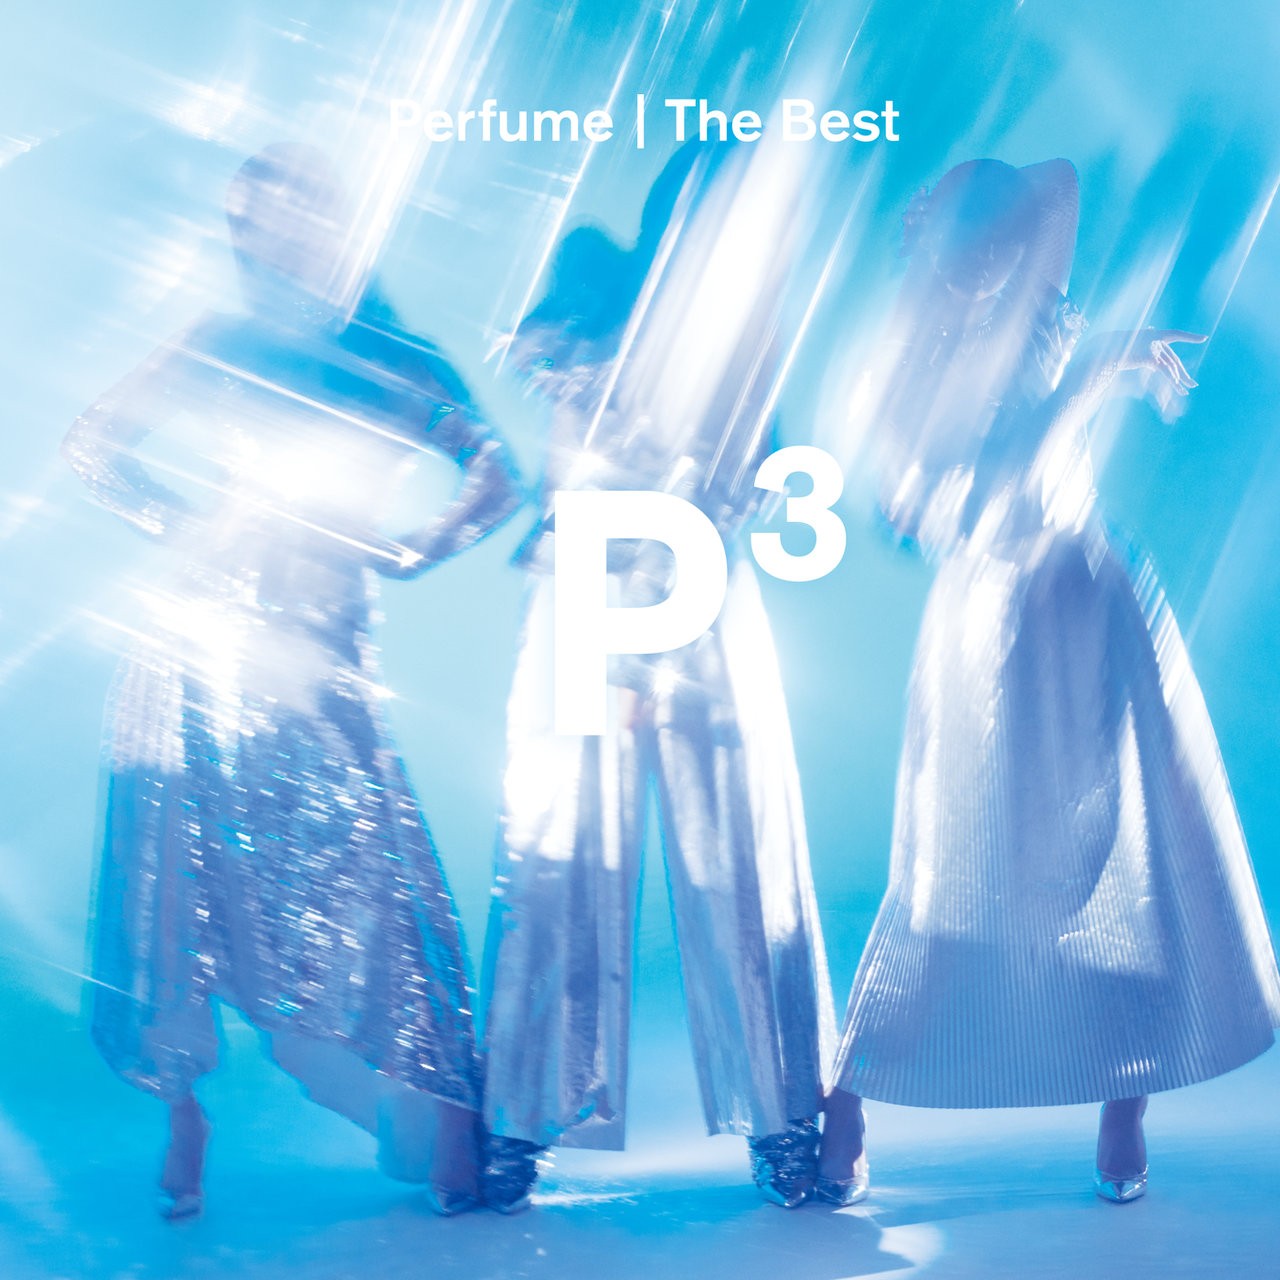 Perfume – Perfume The Best “P Cubed” [FLAC + MP3 320 + Blu-ray ISO] [2019.09.18]